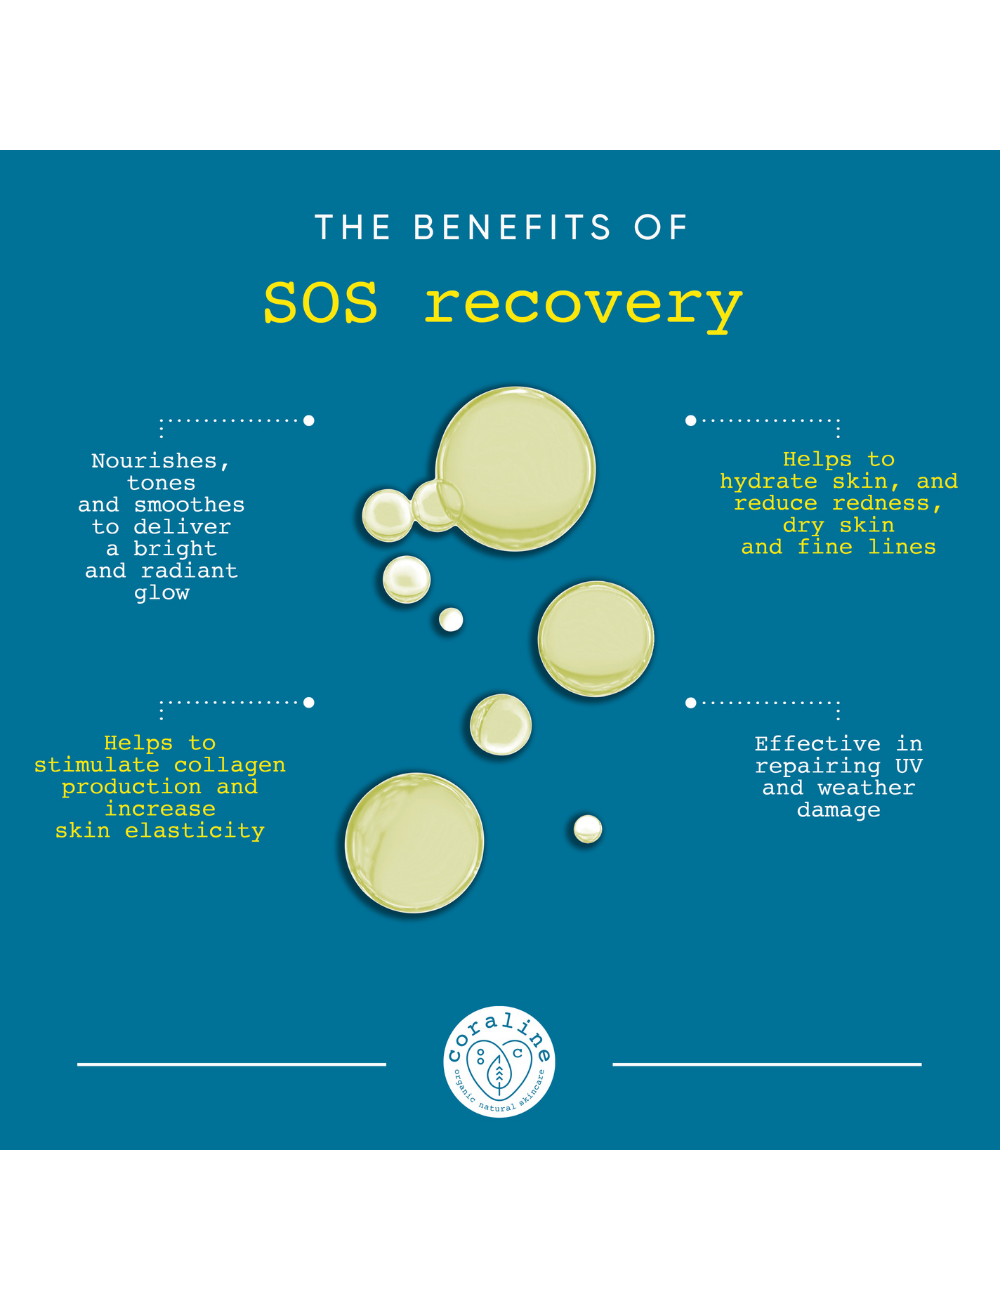 SOS Recovery - Instant Hydration Facial Oil